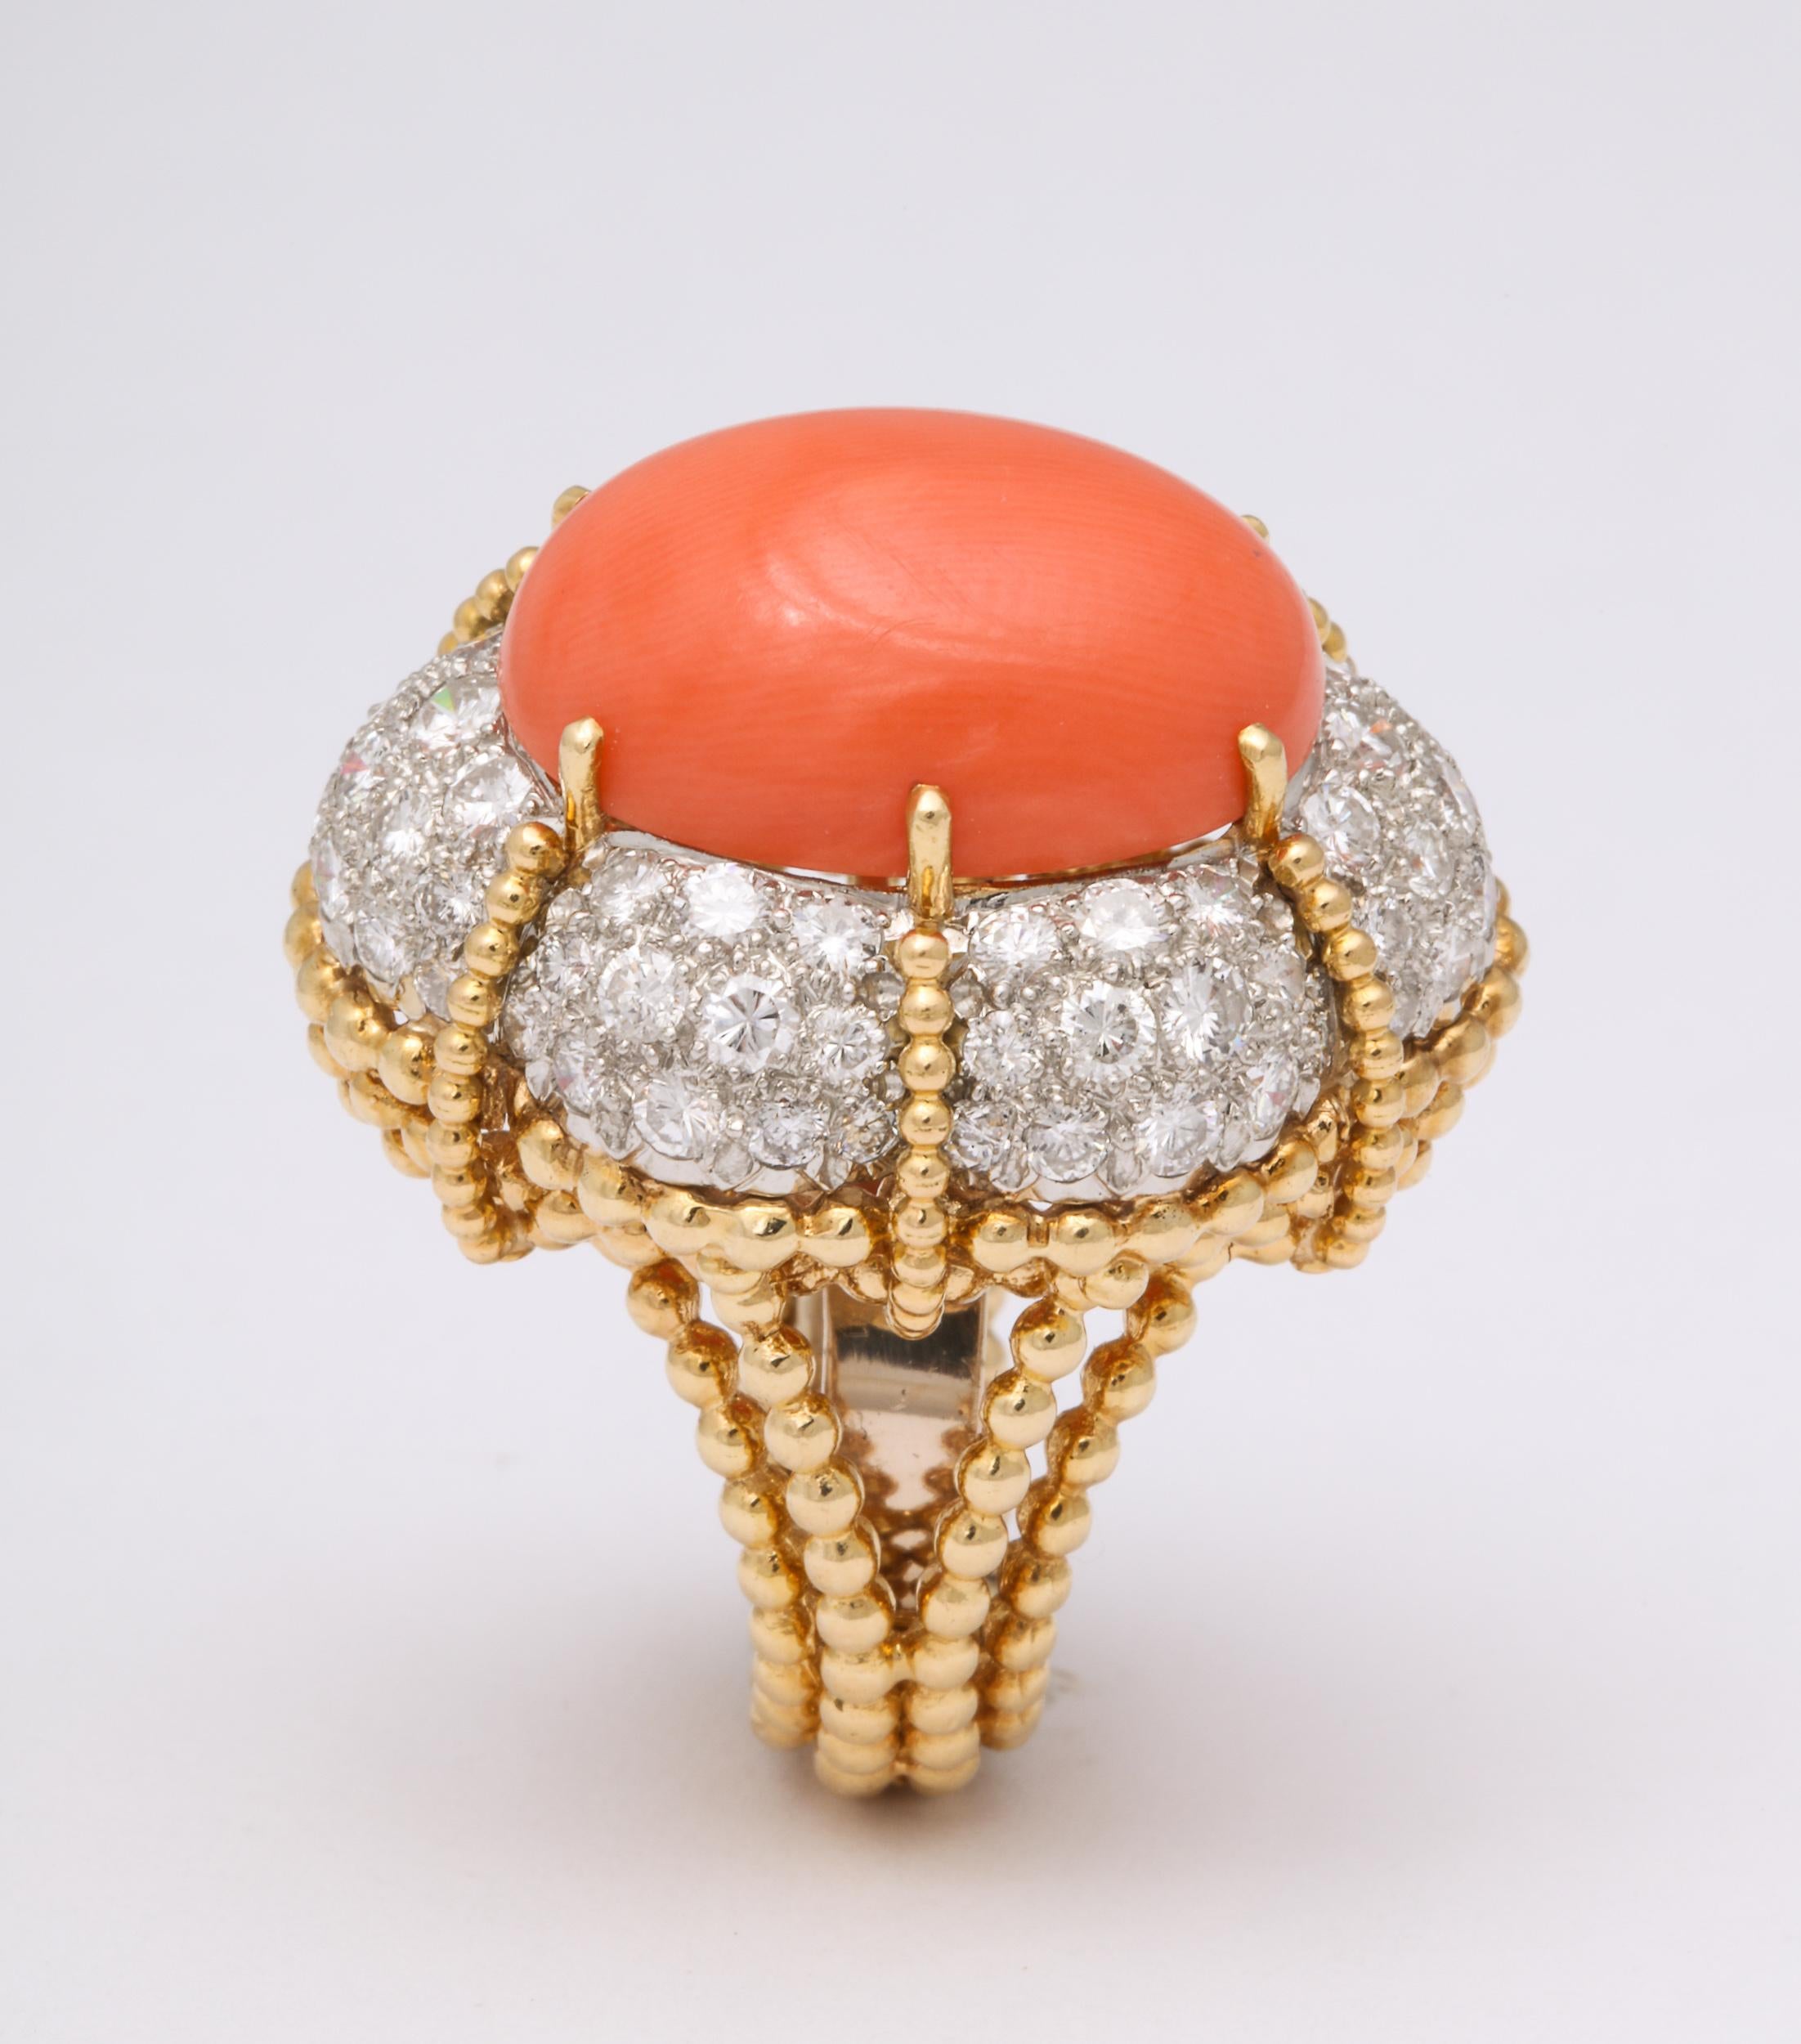  Cabochon Orange Coral and Diamond Ring measuring 20mm x 15mm and  set in a handmade  18kt Karat Yellow Gold beaded rope Mounting.  The 98 Diamonds measure approximately 5 carats total.  Very elegant and regal.  Size is approximately 5.75 but can be